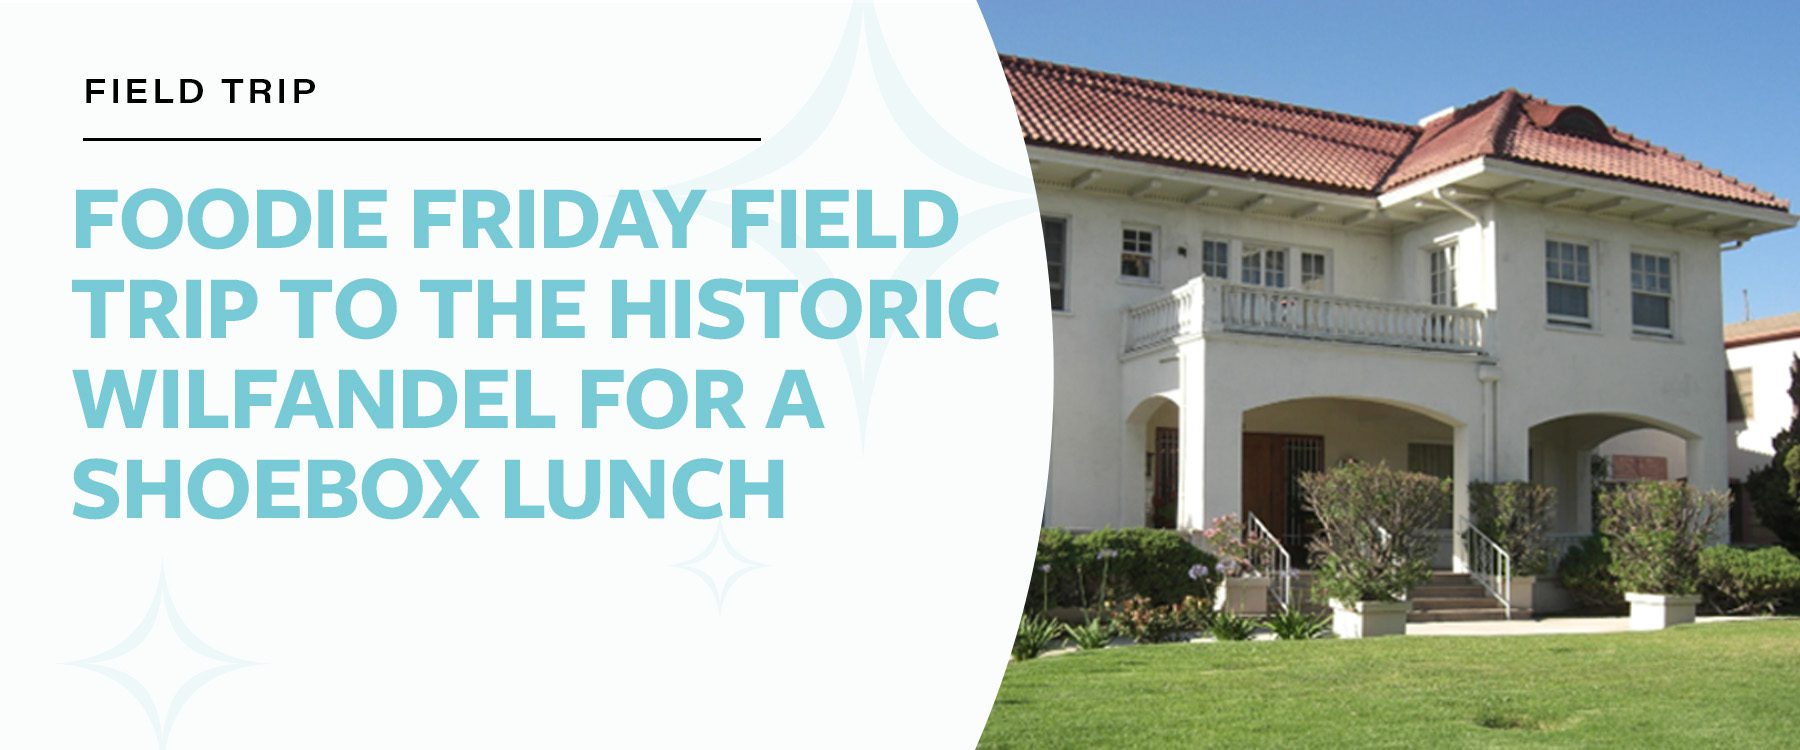 Foodie Friday Field Trip to the Historic Wilfandel for a Shoebox Lunch